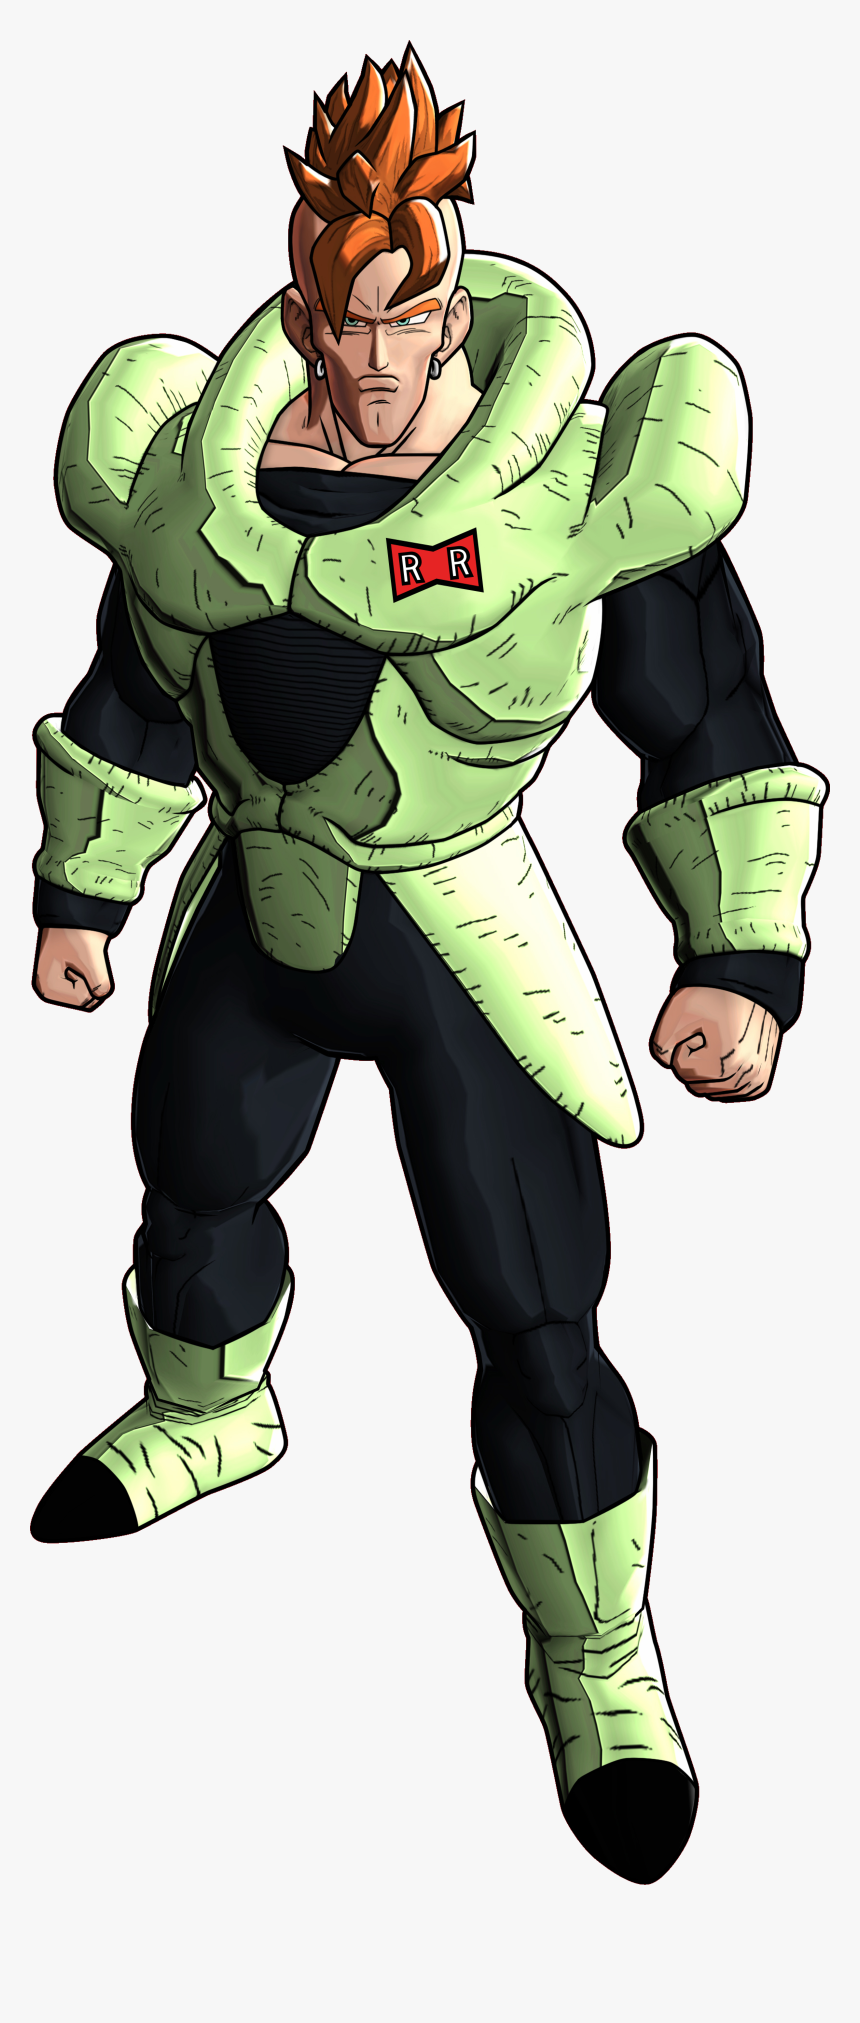 Android16 Battle Of Z Render - N 16 Dragon Ball Z, HD Png Download, Free Download